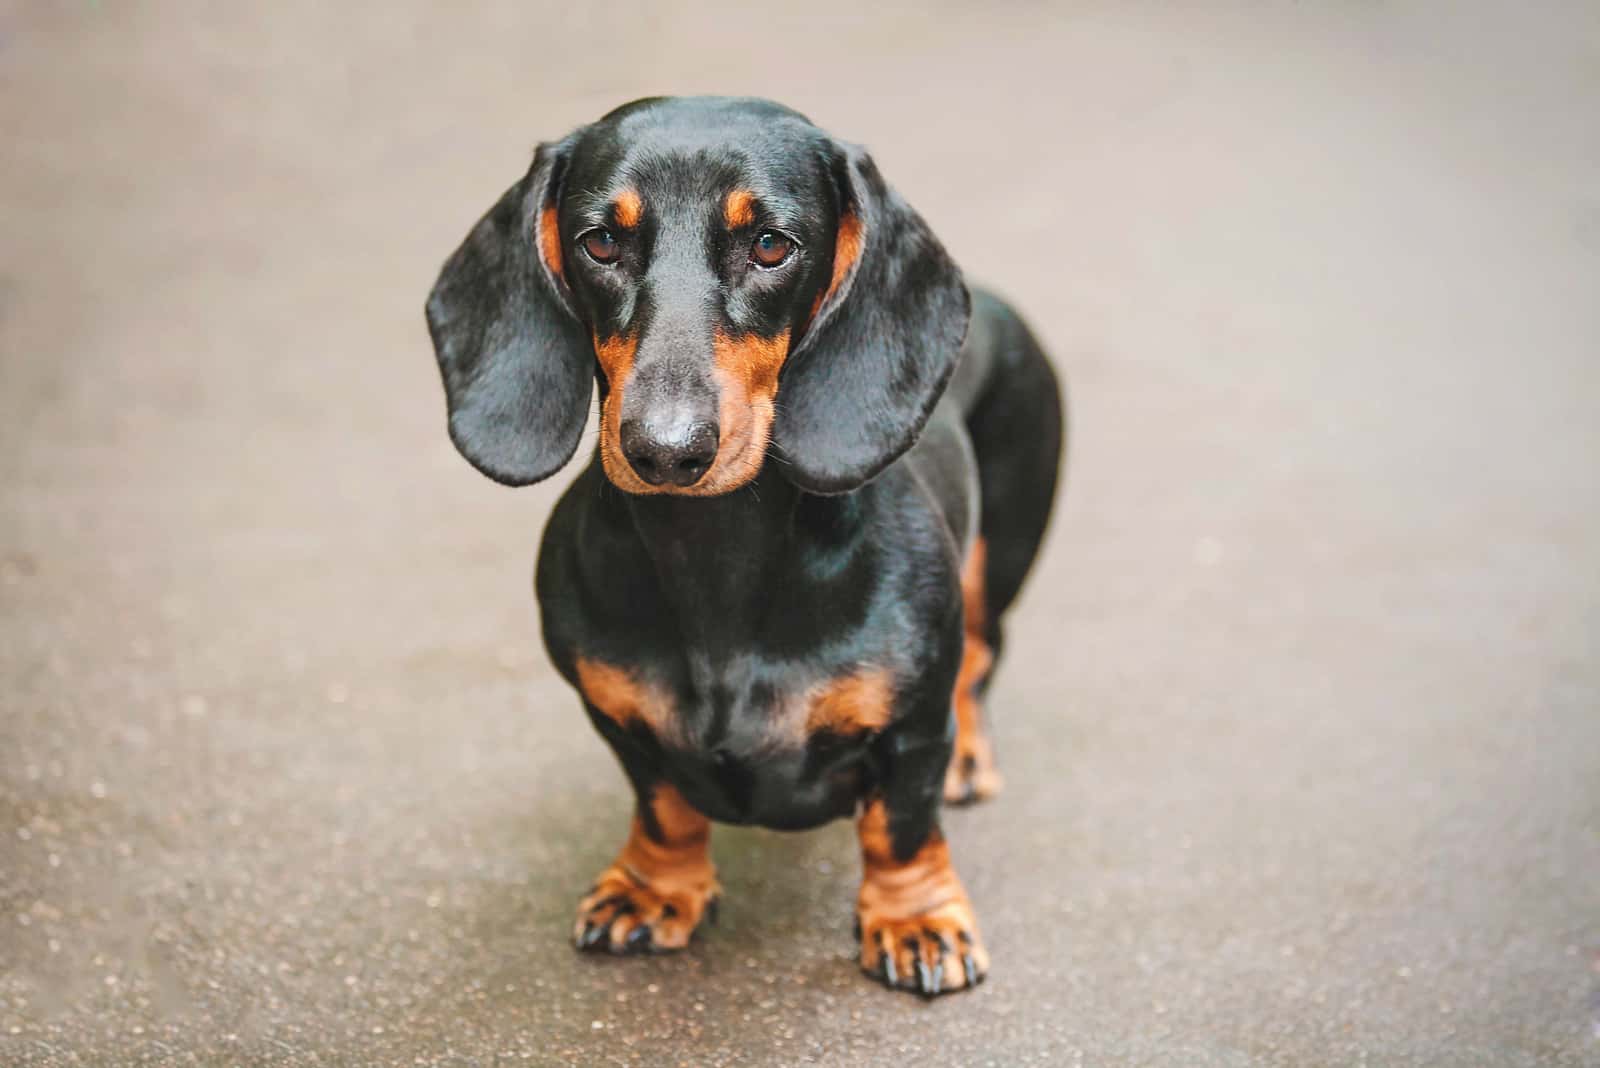 the dachshund puppy stands and looks at the camera